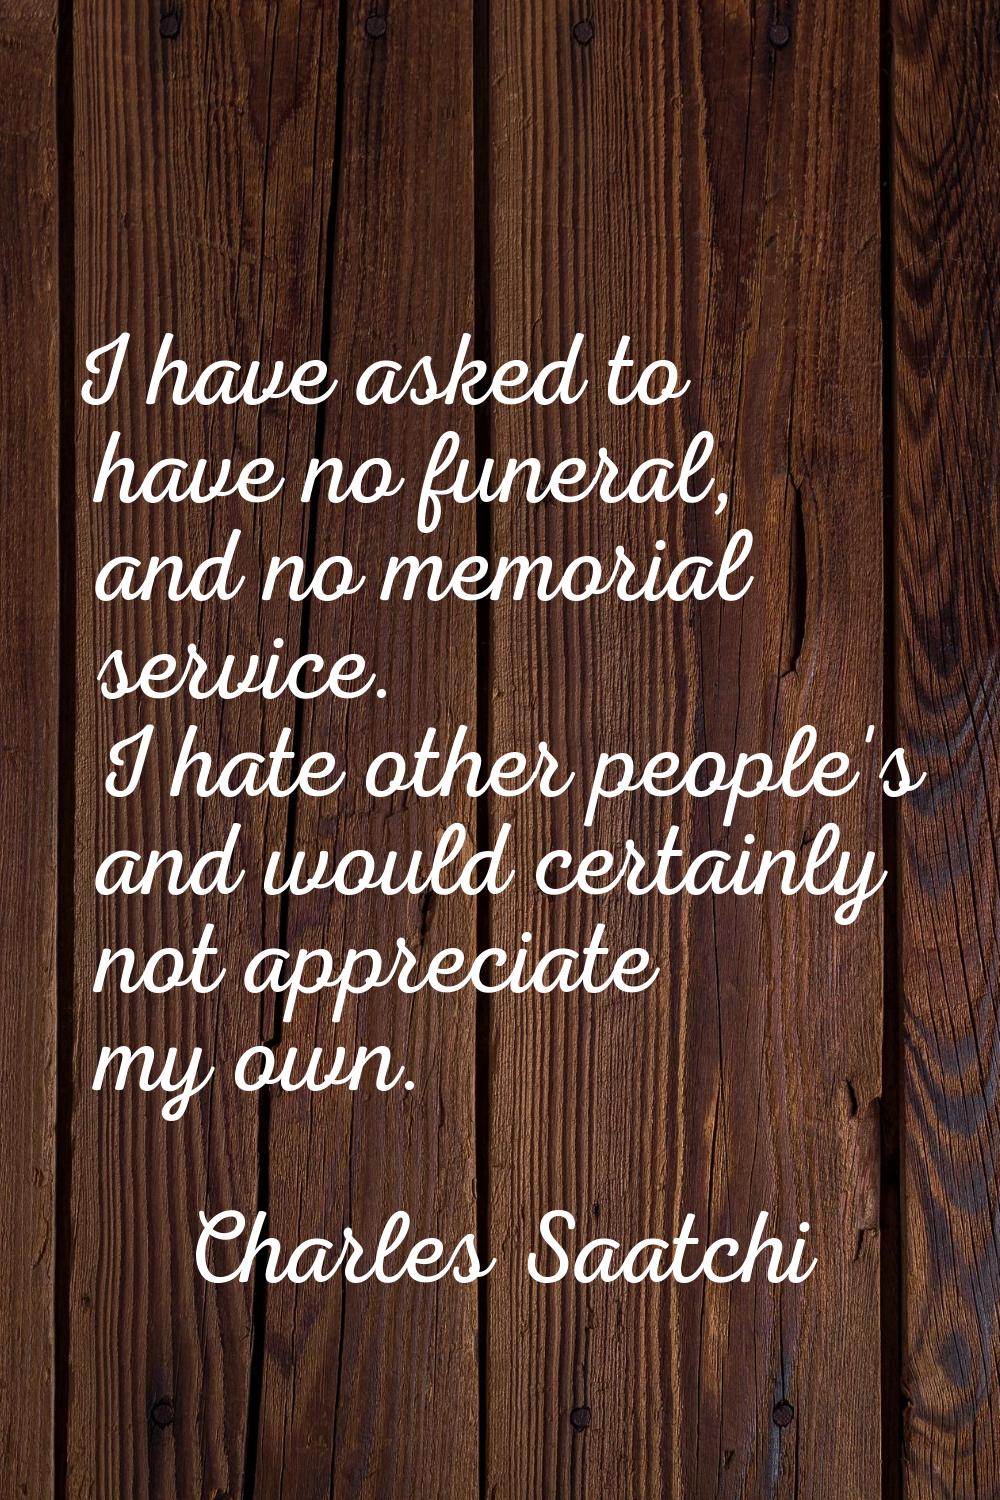 I have asked to have no funeral, and no memorial service. I hate other people's and would certainly